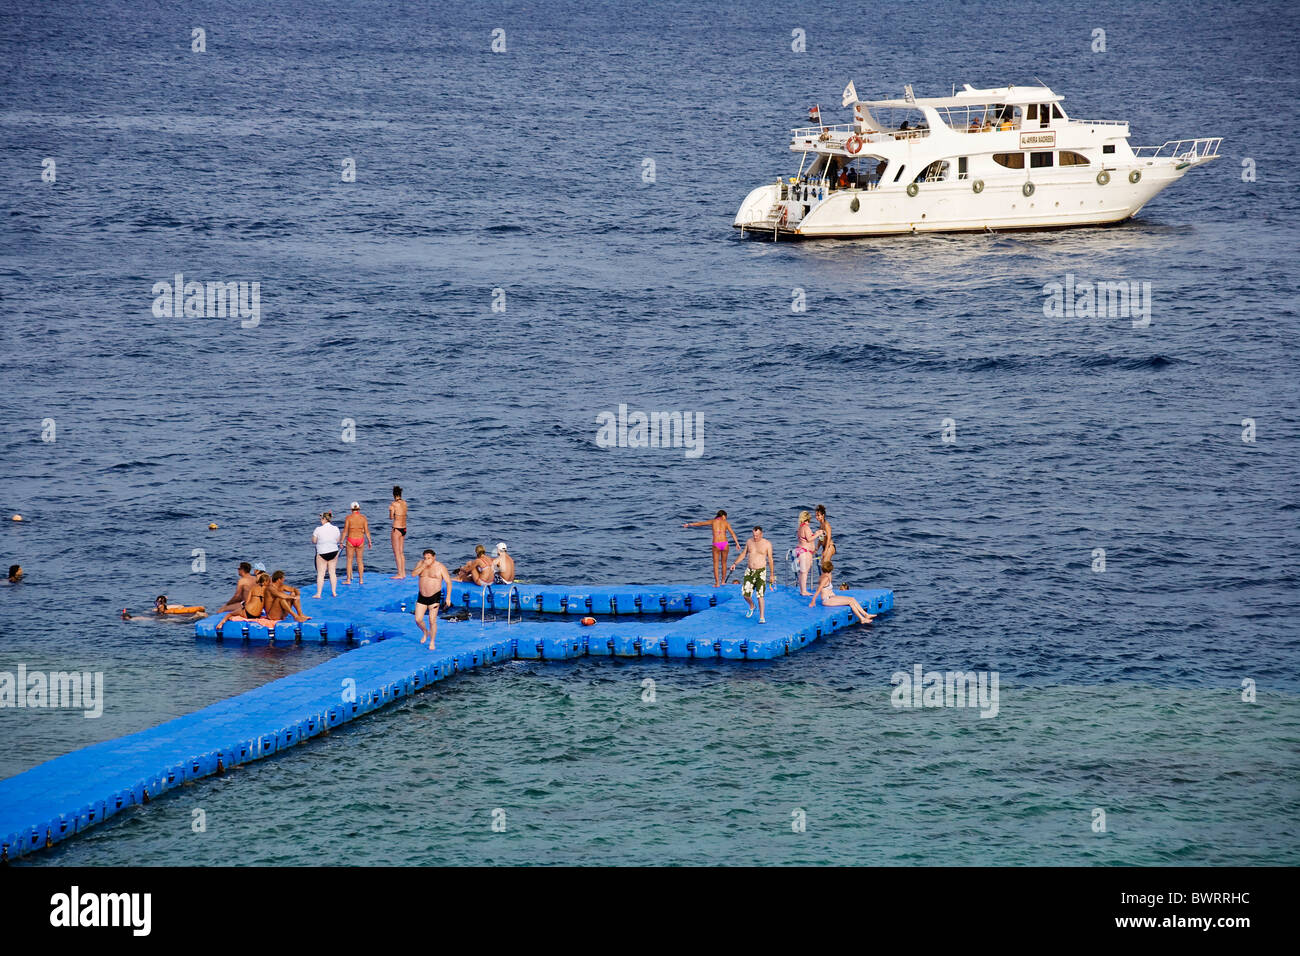 Floating platform for snorkeling and diving in the Red Sea, Sharm el Sheikh, Egypt, Africa Stock Photo